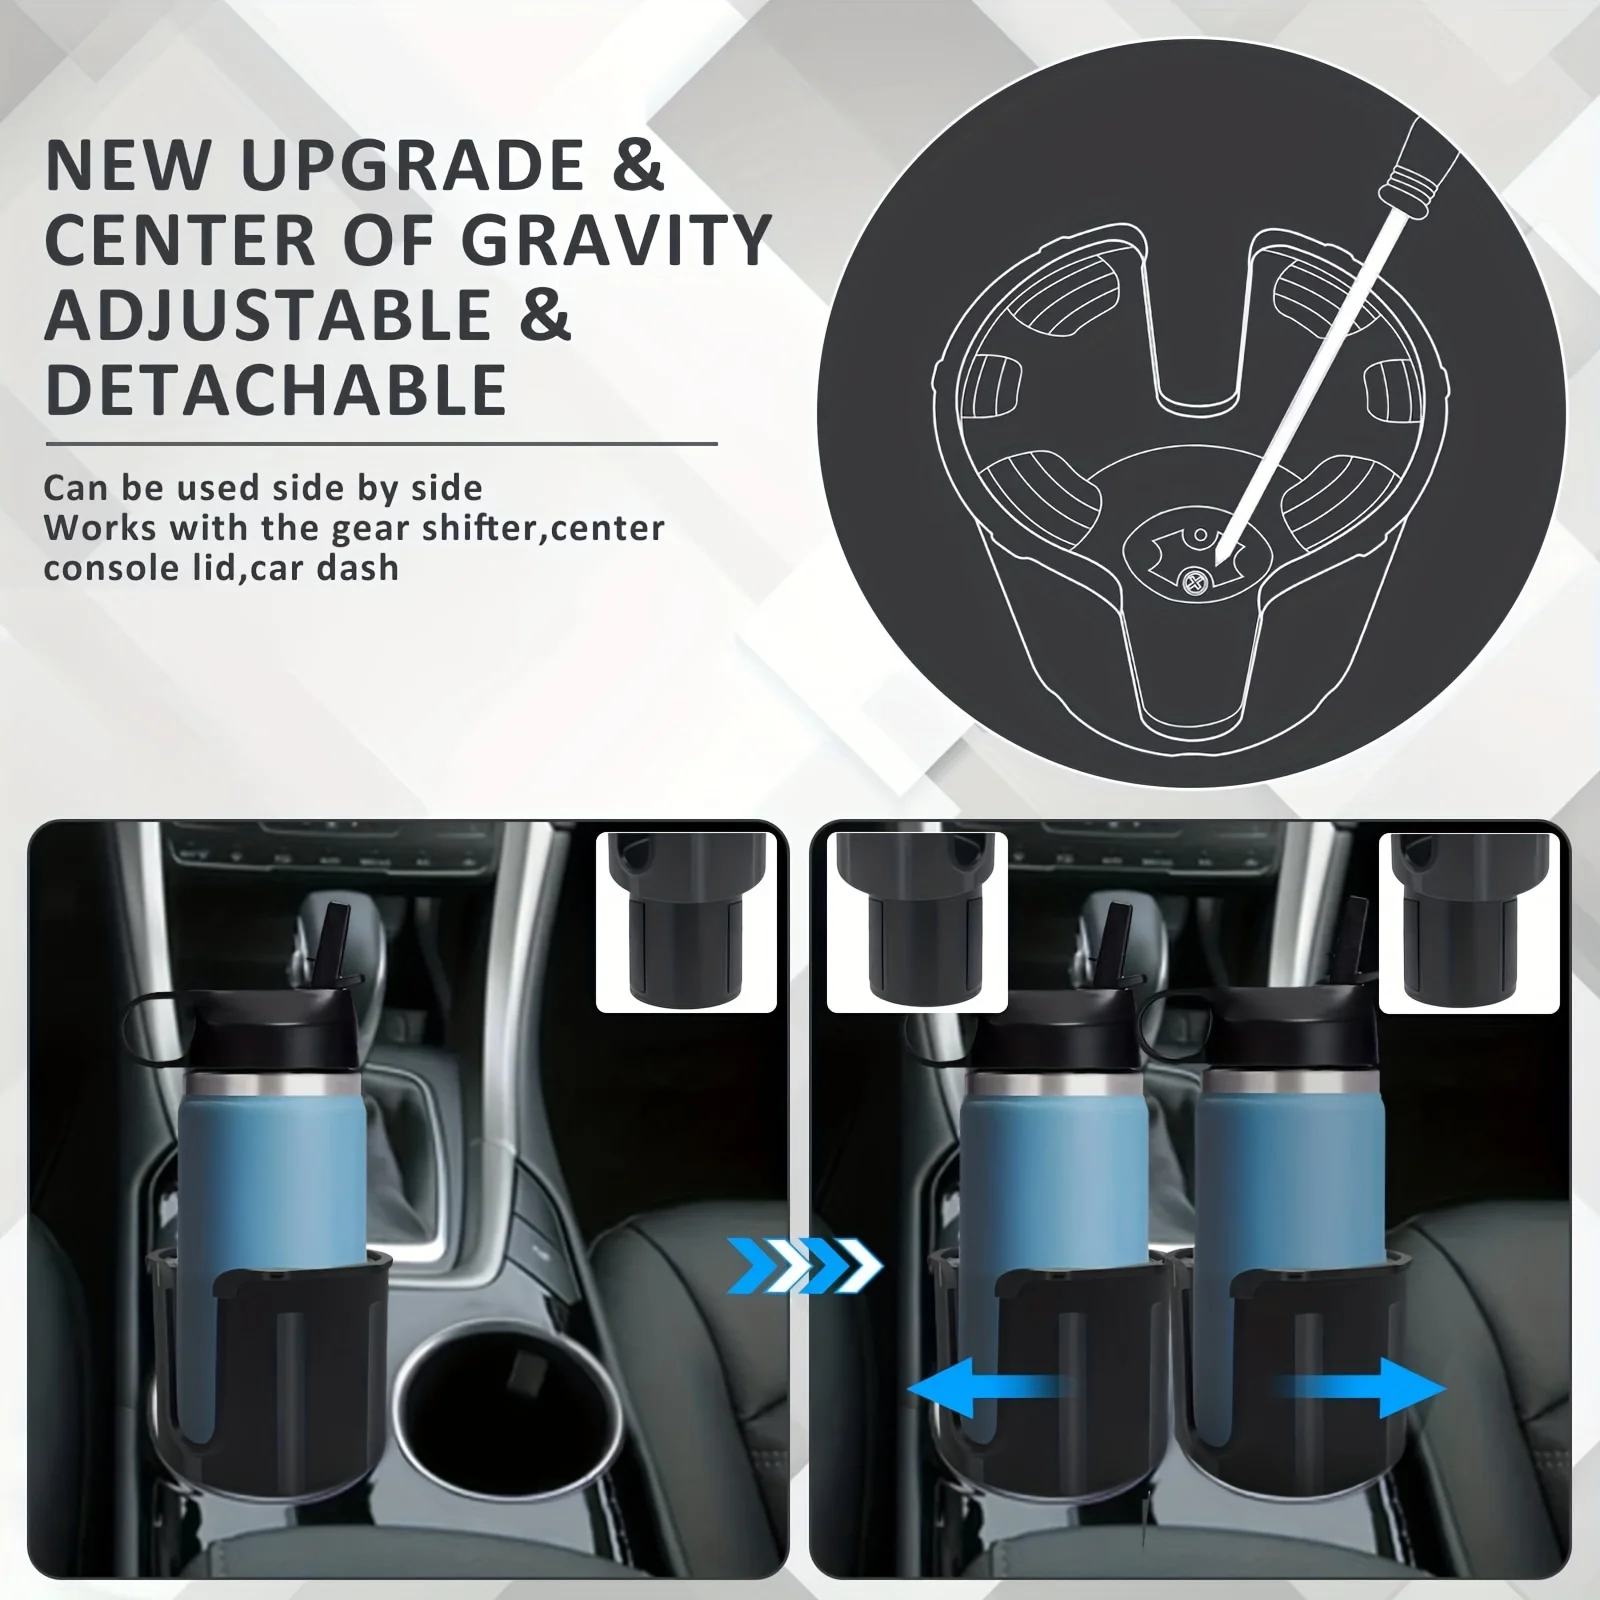 Car Cup Holder Extender With Adjustable Offset Base Fits Most Cup Holders,  Car Cup Holder Extender Compatible With Large 32/40oz